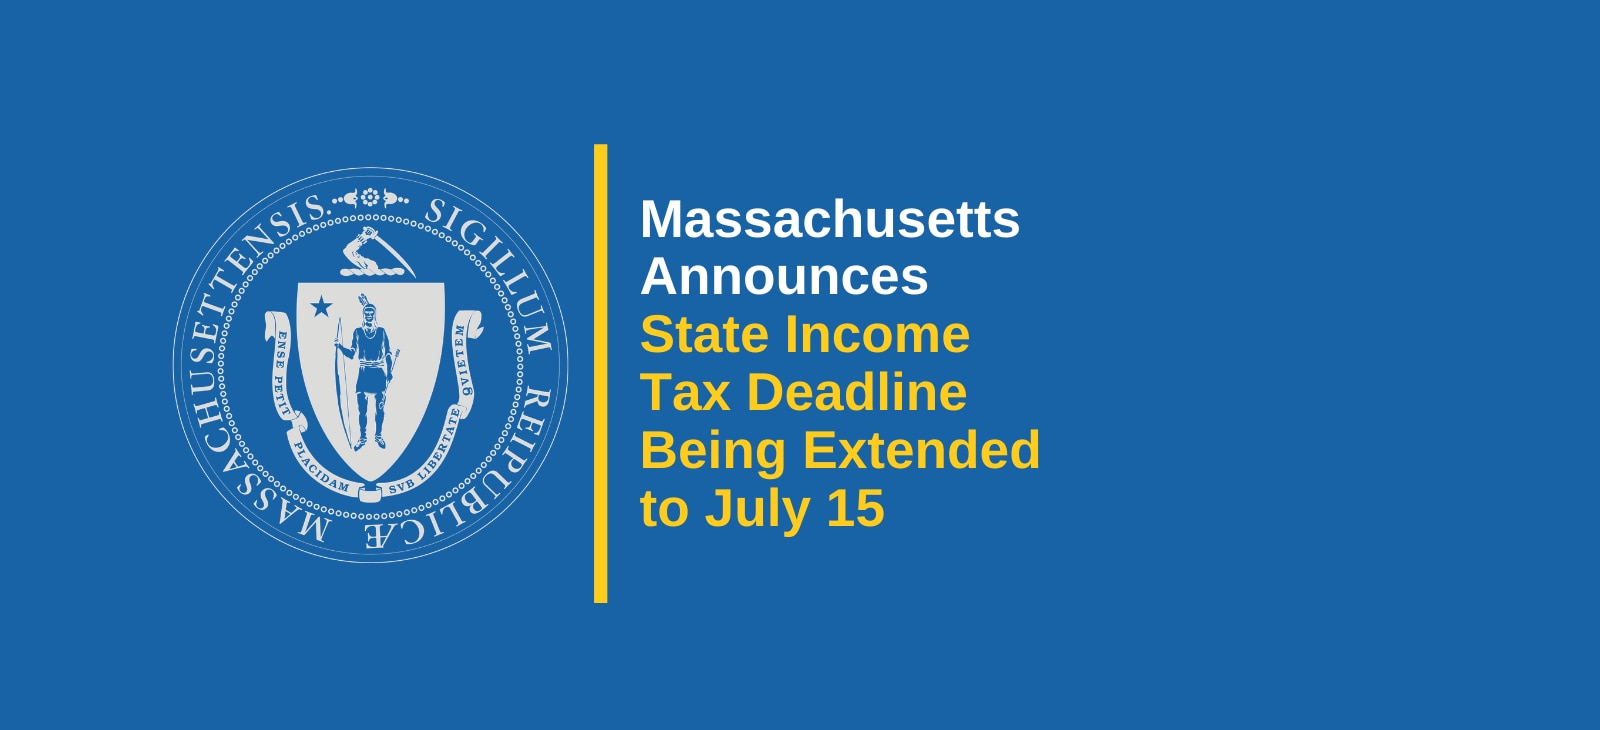 Massachusetts Announces State Income Tax Filing Deadline Being Extended to July 15